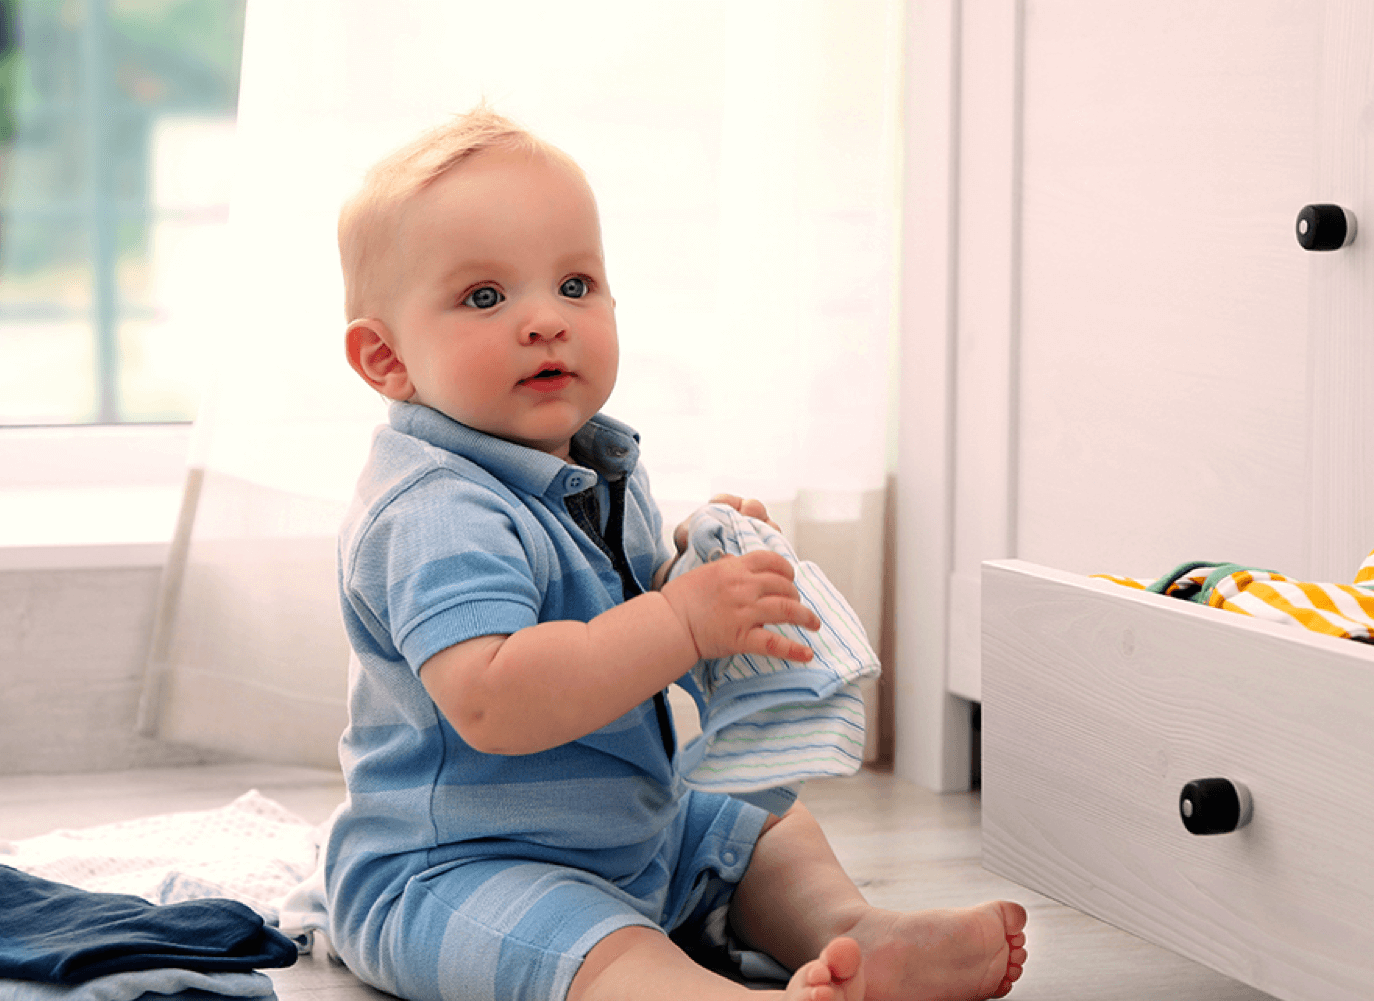 A baby sits on the floor and plays with some laundry. He is looking off camera